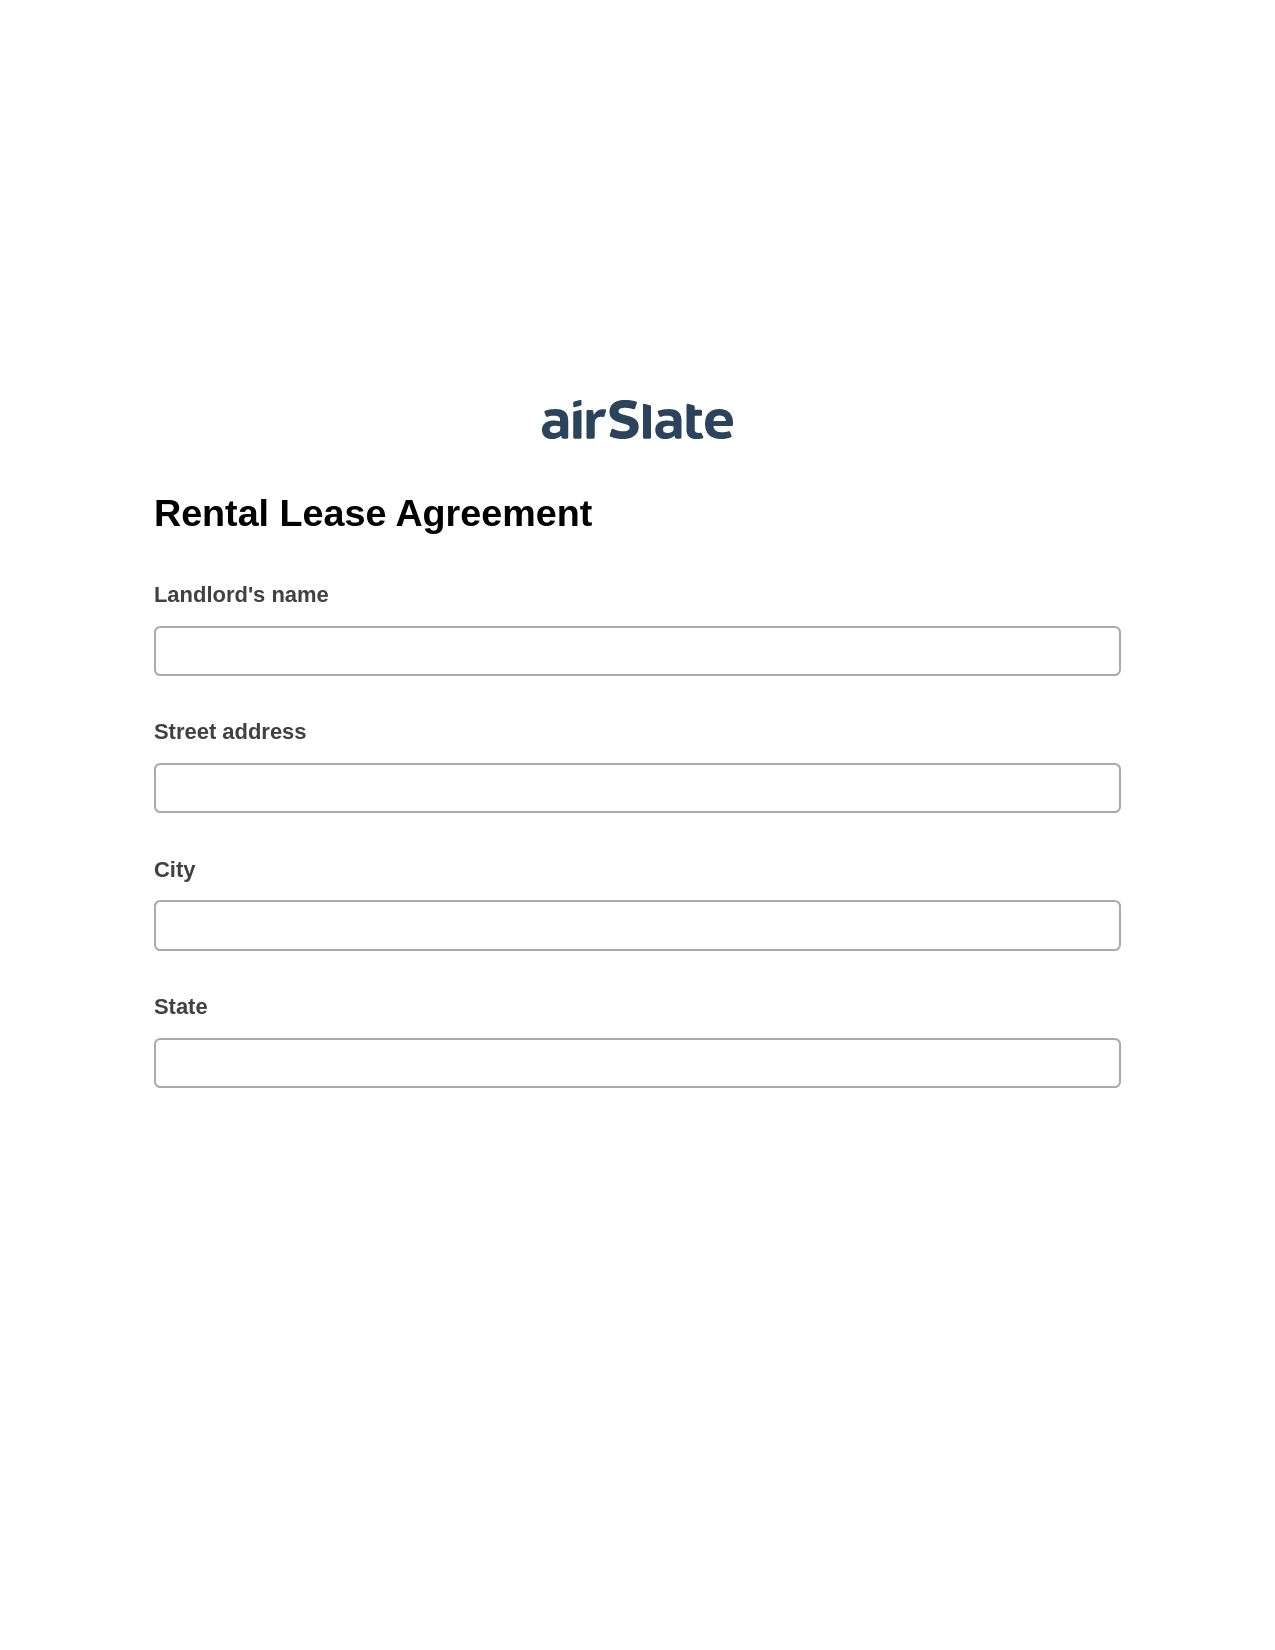 Multirole Rental Lease Agreement Pre-fill from Google Sheet Dropdown Options Bot, Update NetSuite Records Bot, Export to Smartsheet